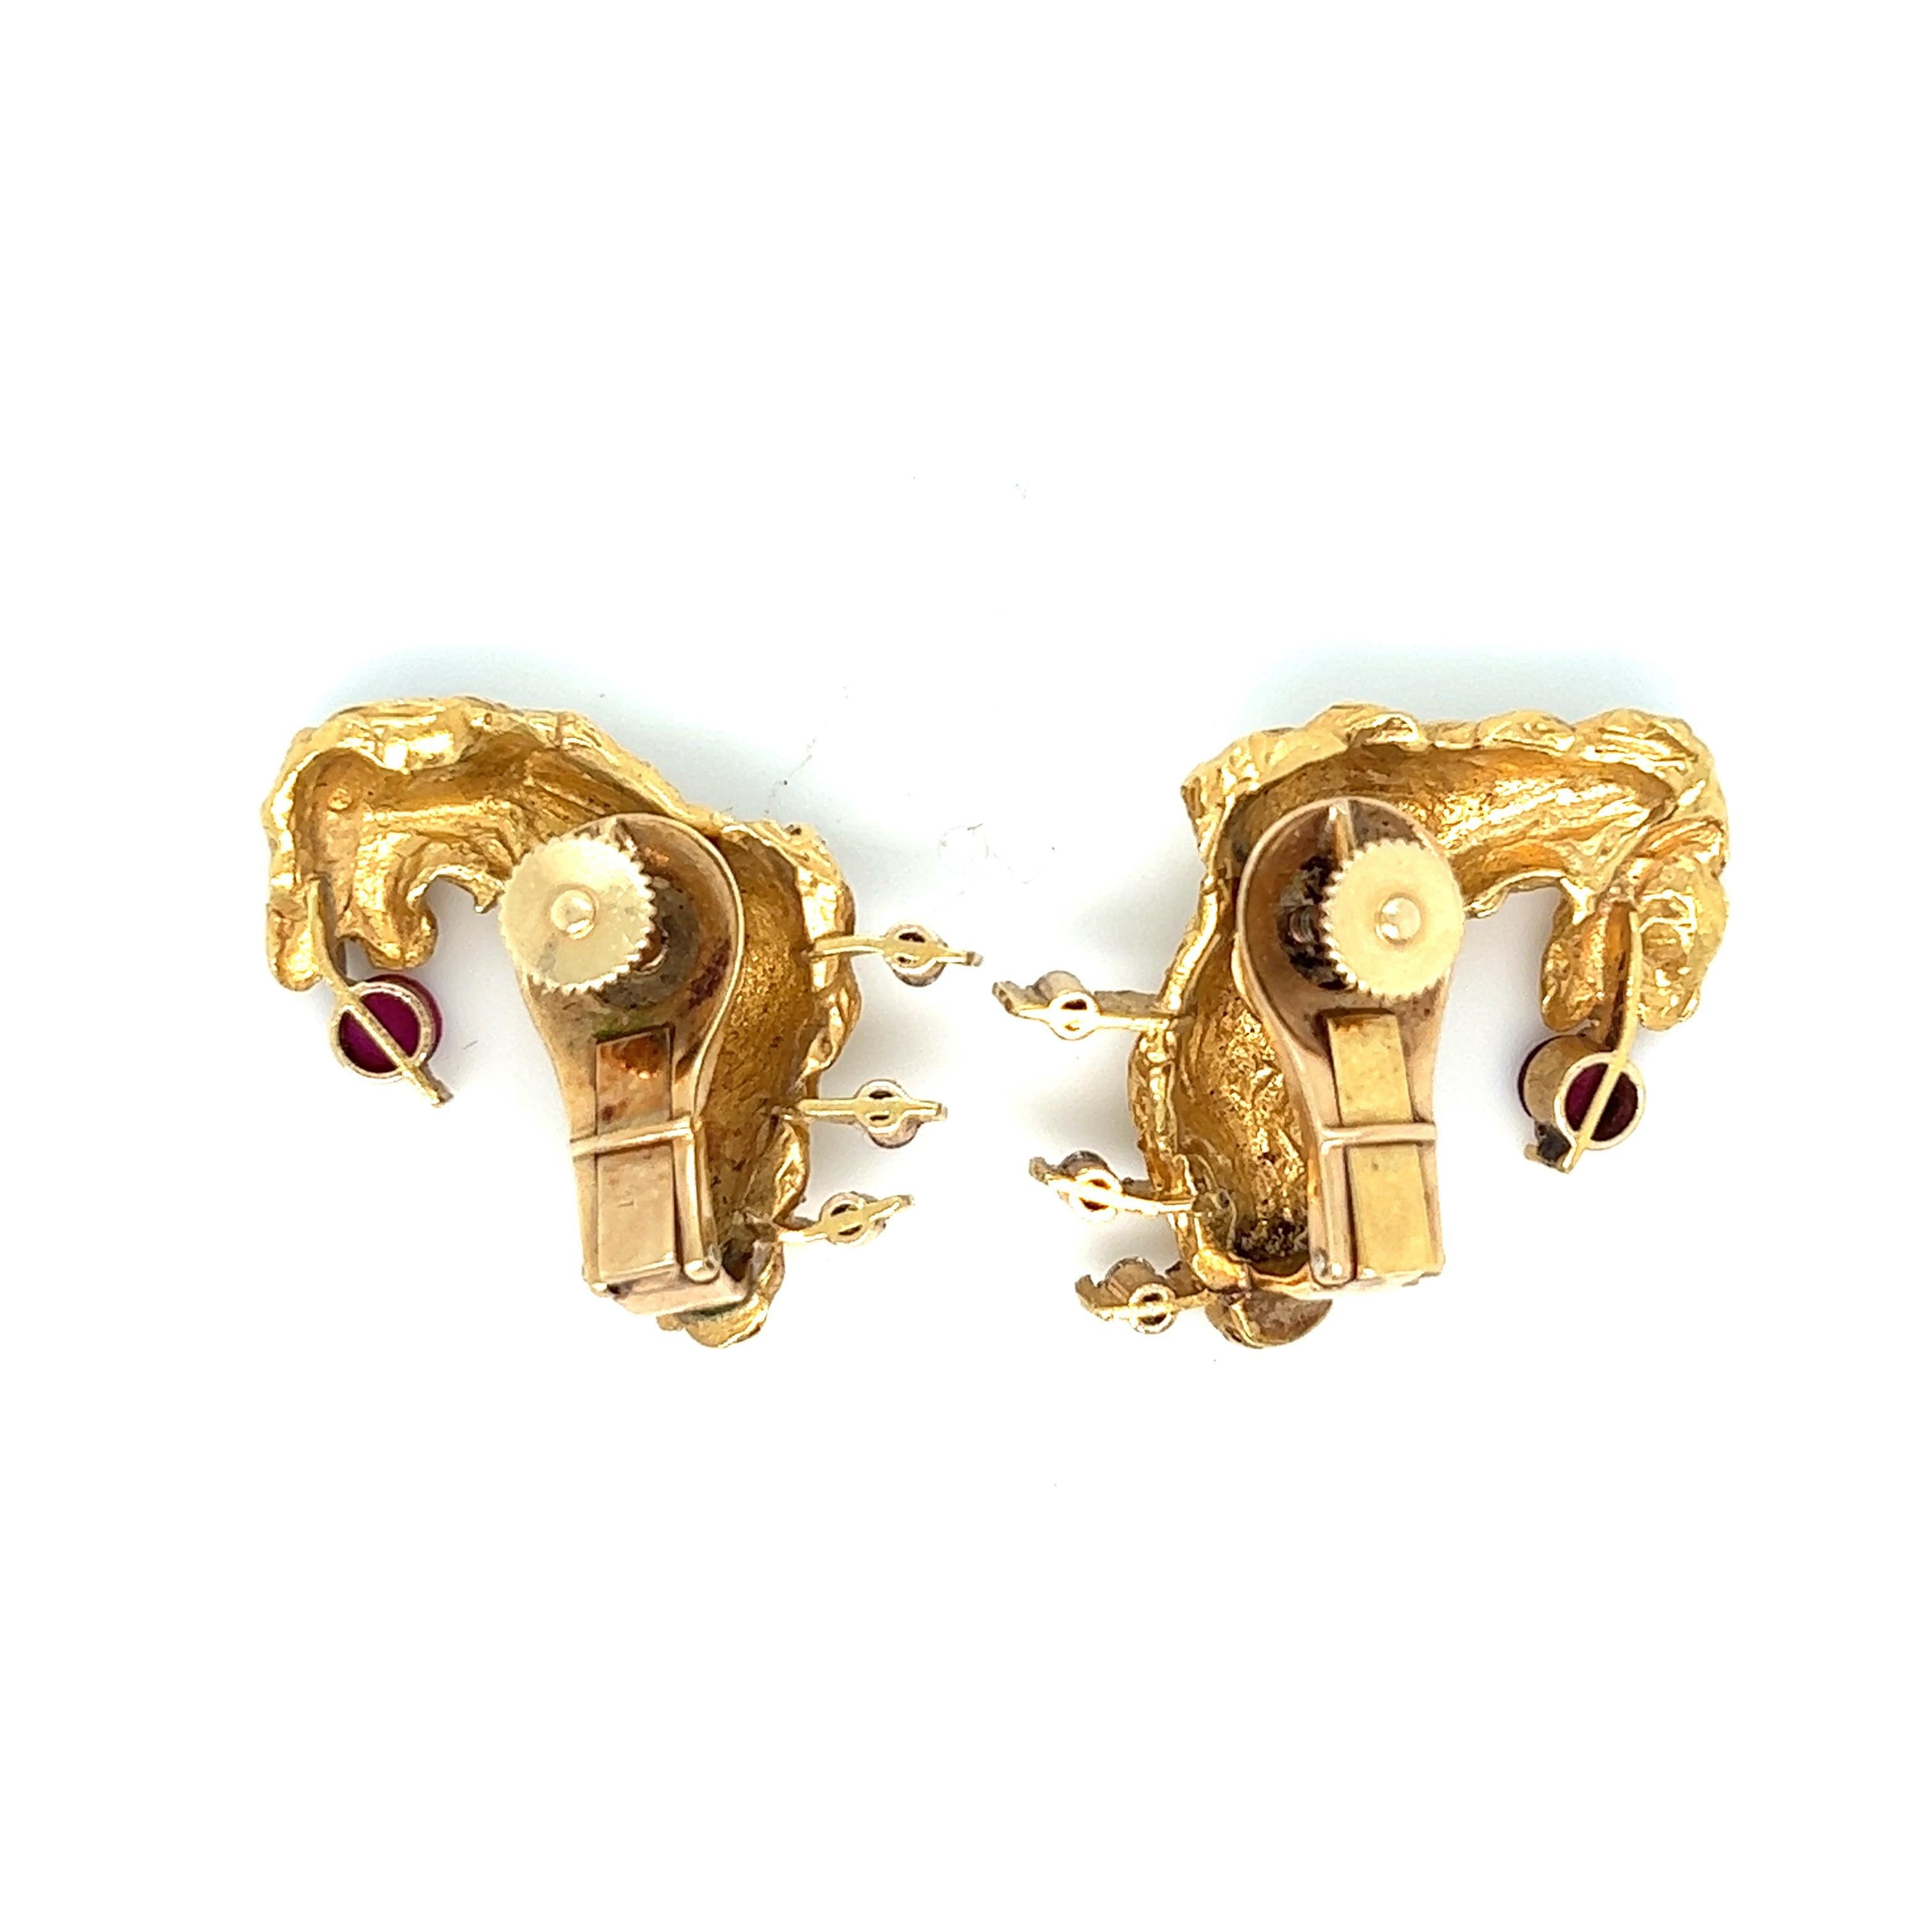 Stanley Lechtzin gold ruby diamond ear clips 

Of abstract form, set with circular-cut rubies of approximately 0.40 carat and full-cut diamonds of approximately 0.18 carat; 18 karat yellow gold

Marked Lechtzin, 18K 

Size: width 1 inch, length 1